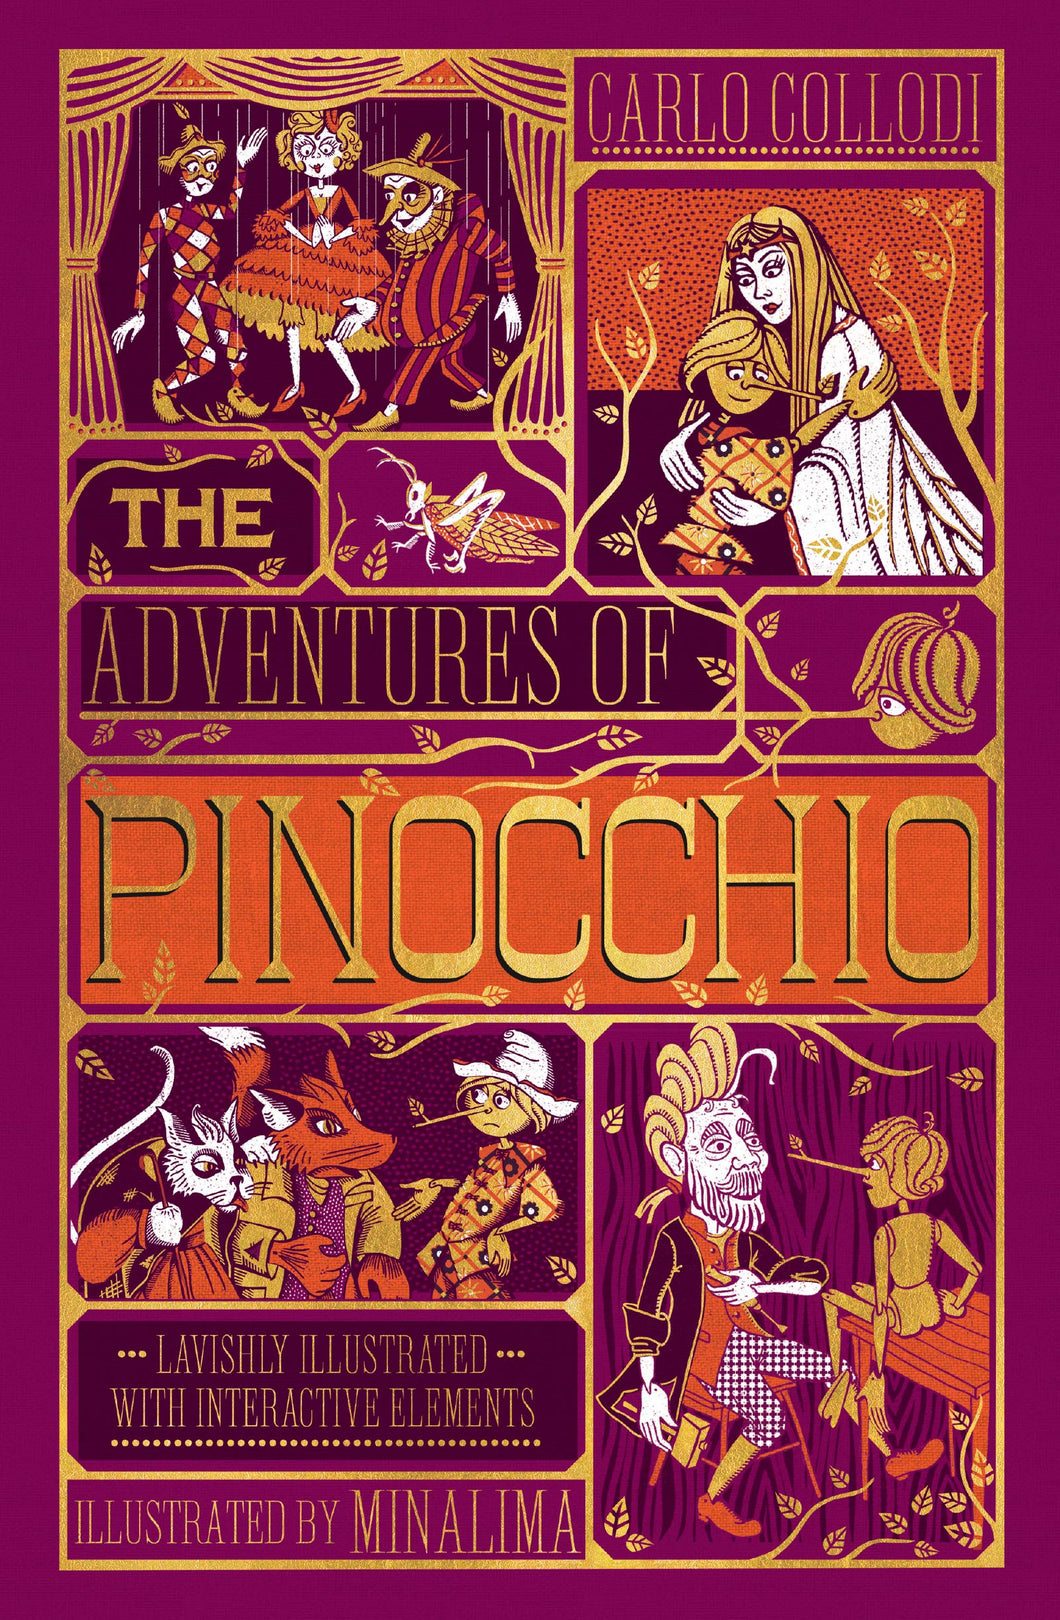 The Adventures of Pinocchio: Ilustrated with Interactive Elements